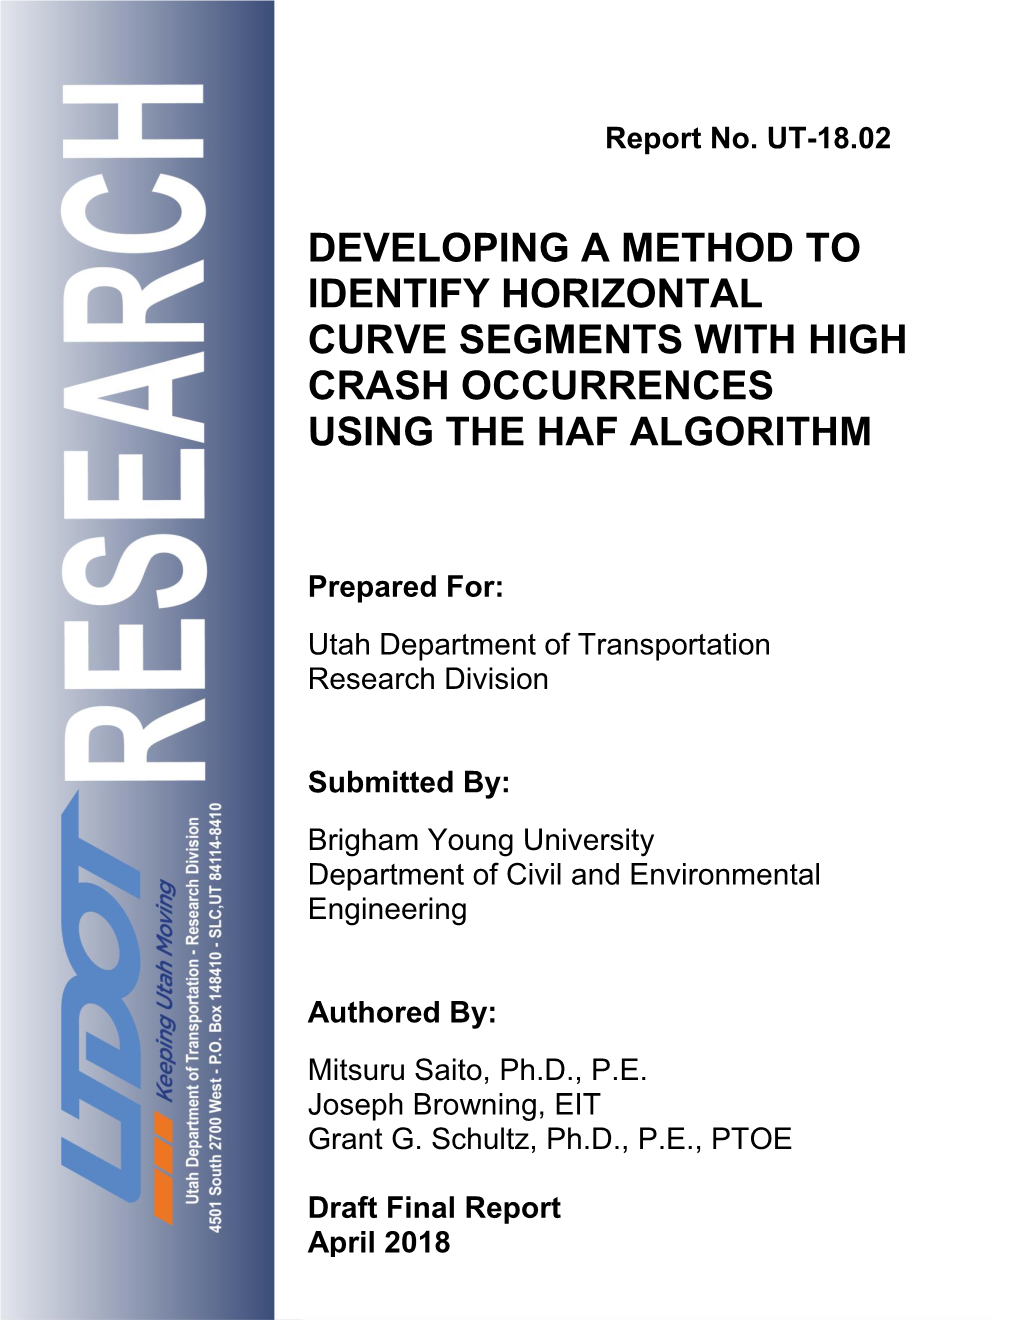 Developing a Method to Identify Horizontal Curve Segments with High Crash Occurrences Using the Haf Algorithm